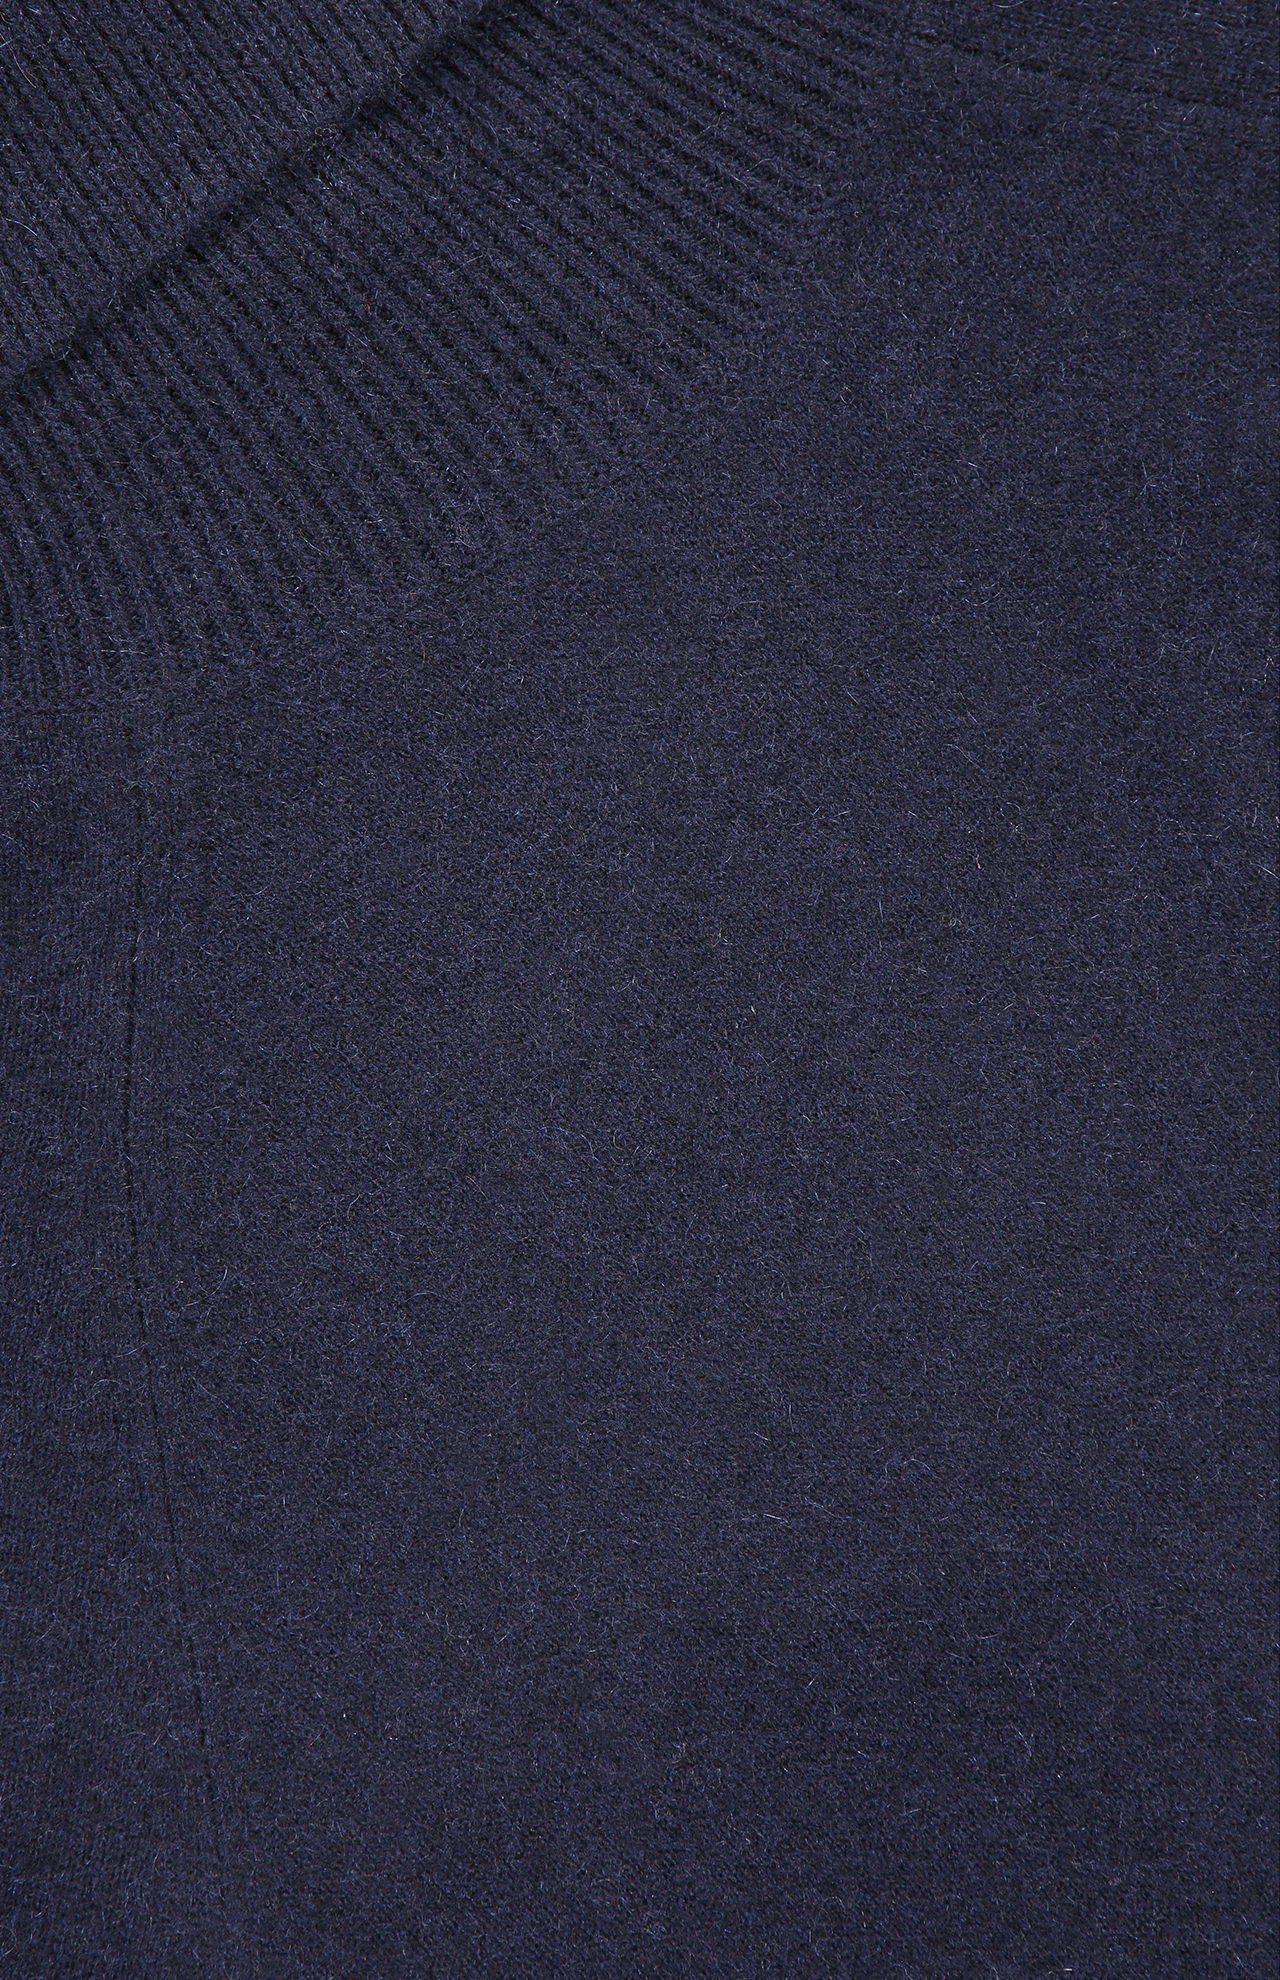 White And Warren Cashmere Essential Turtleneck Sweater Deep Navy Top Detail Image (6977567096947)